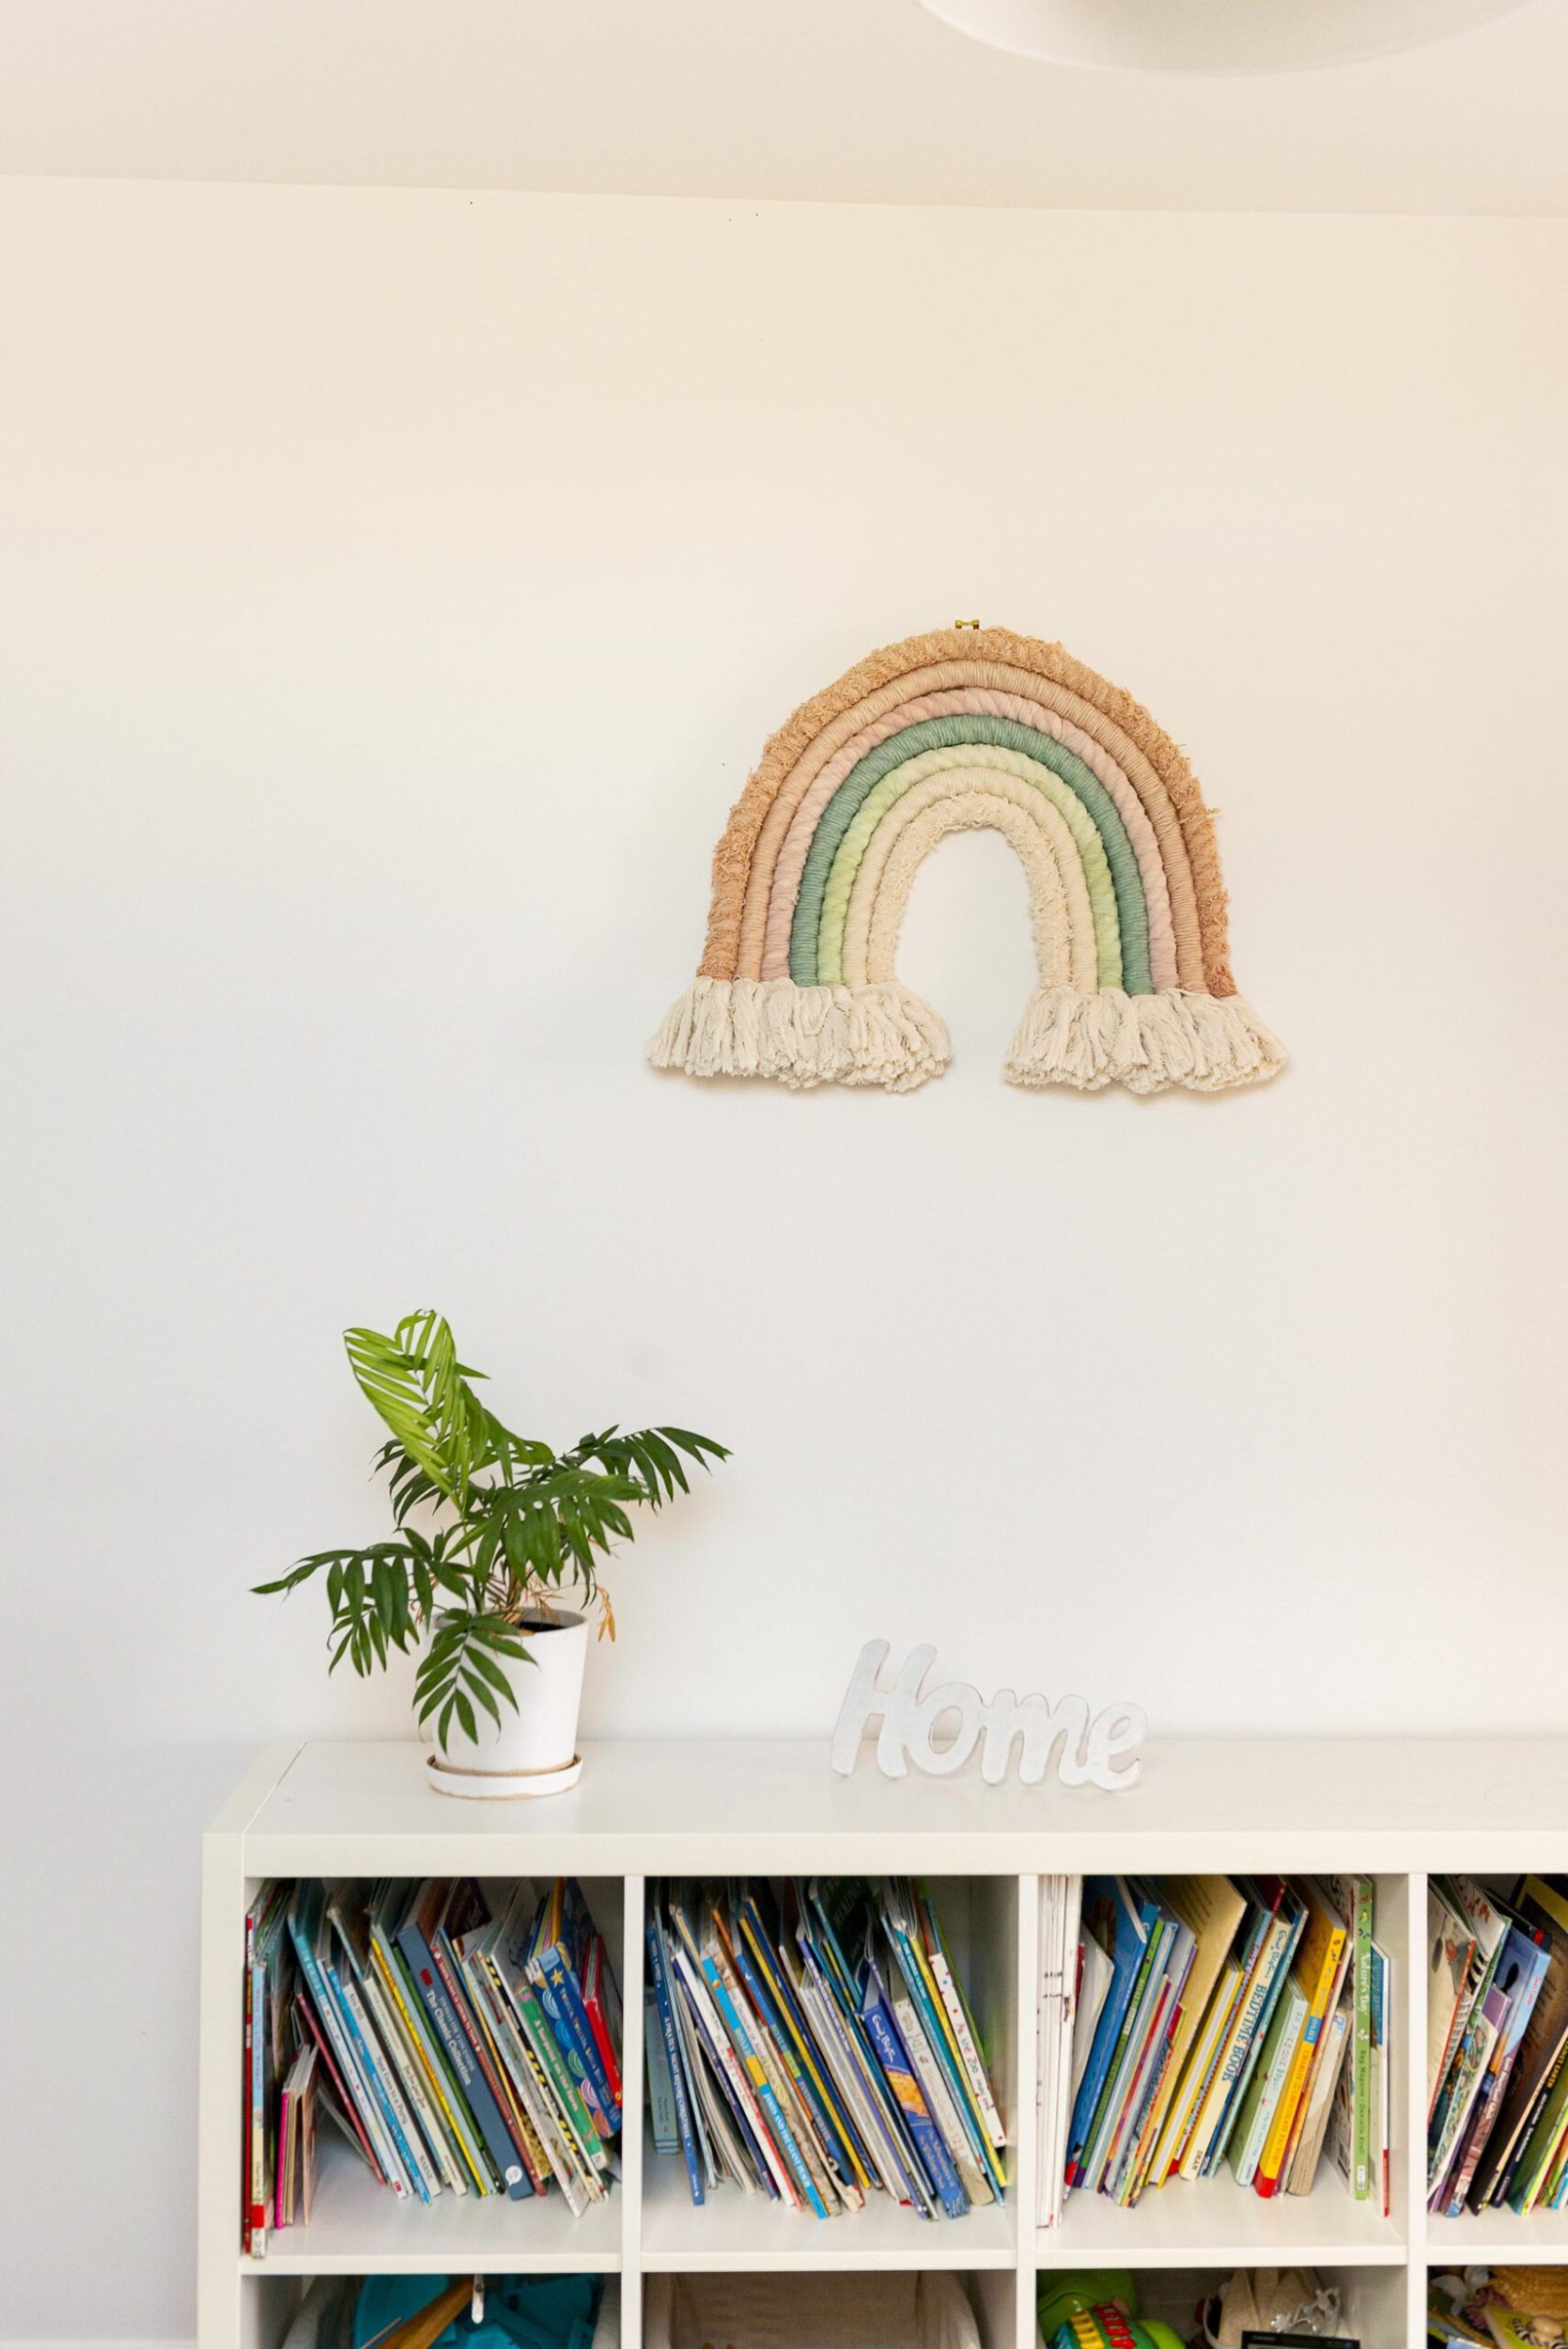 A rainbow macrame wall hanging on a white wall and a bookshelf on the floor below